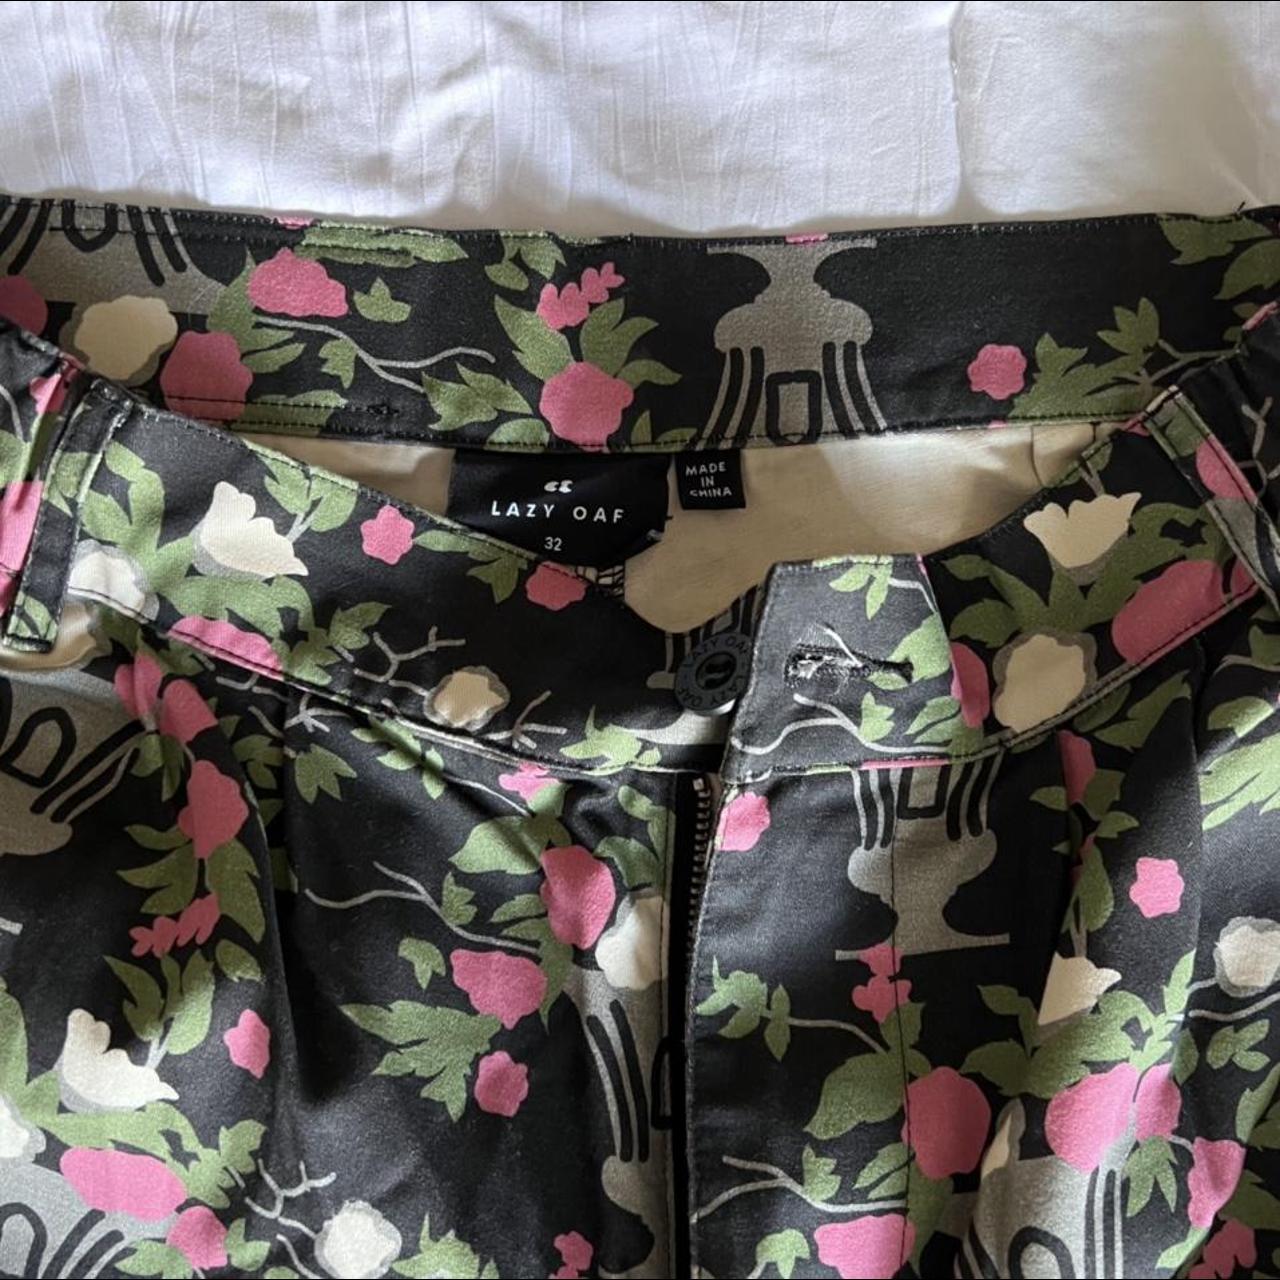 Product Image 3 - Lazy oaf floral trousers size